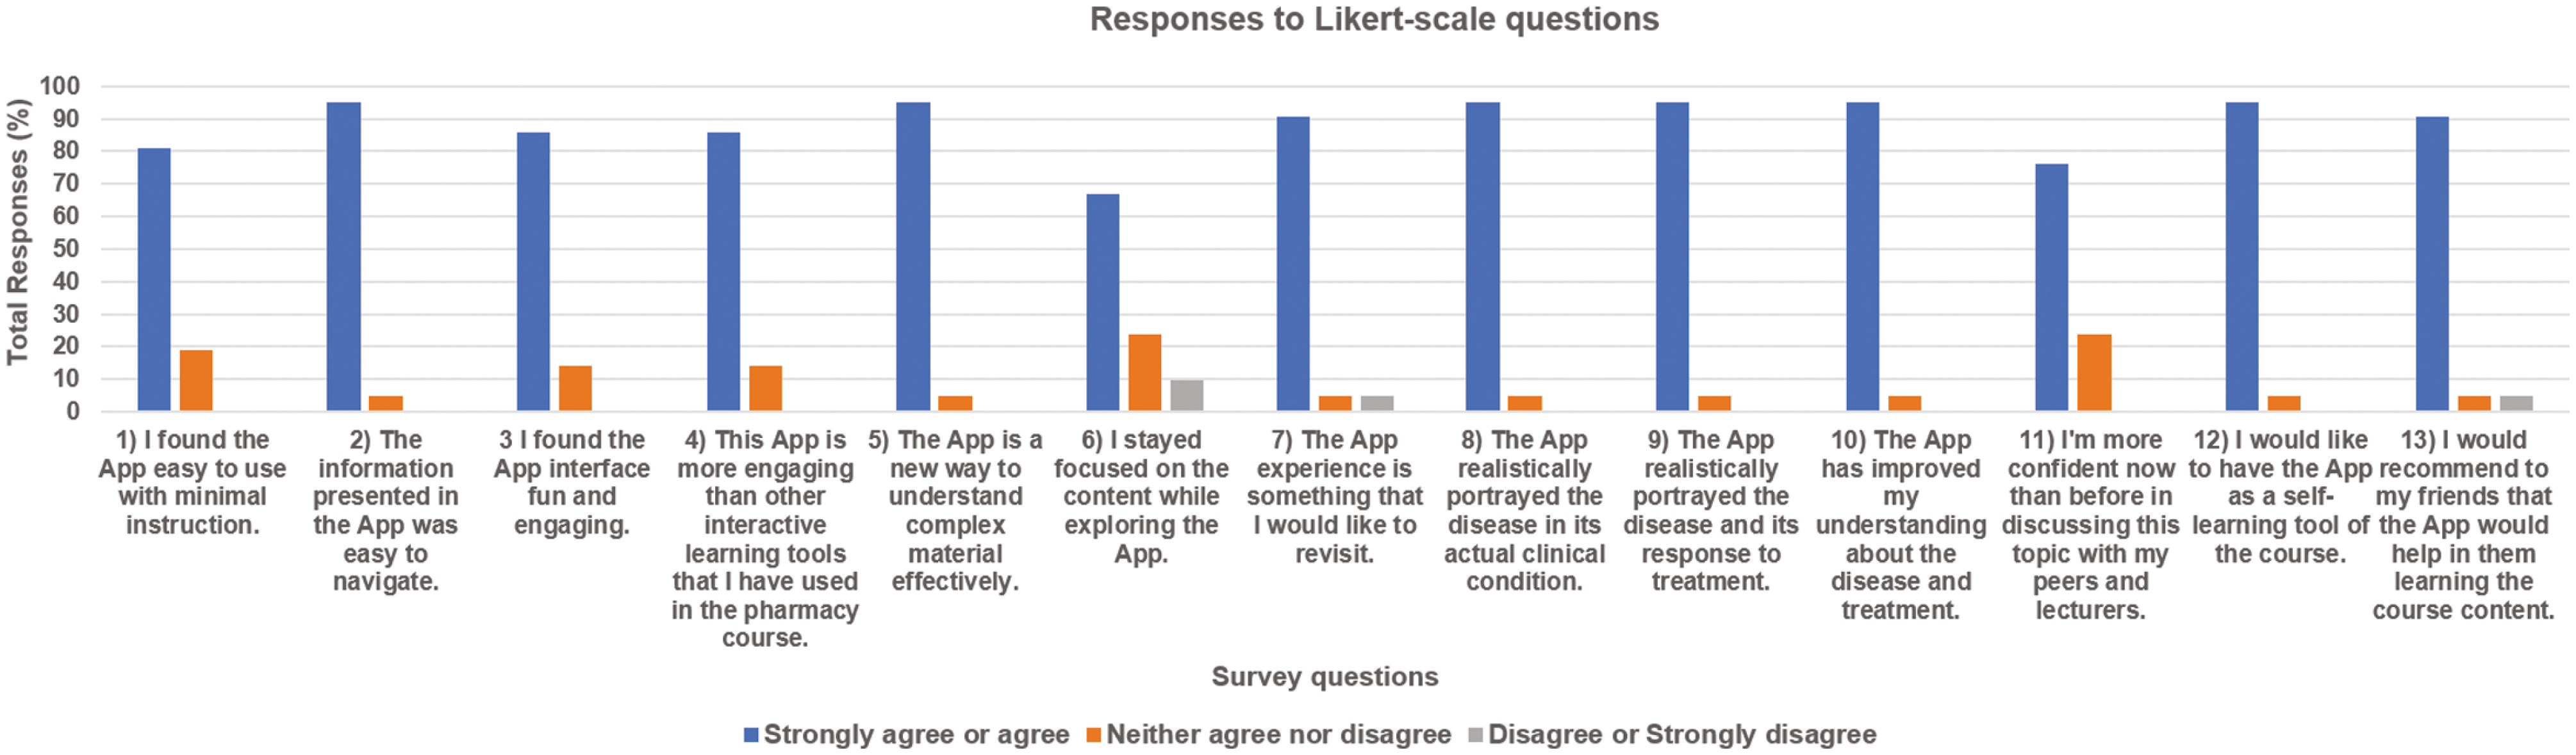 Pharmacy students’ responses (13.5%) to the revised version of the AR App in 2021